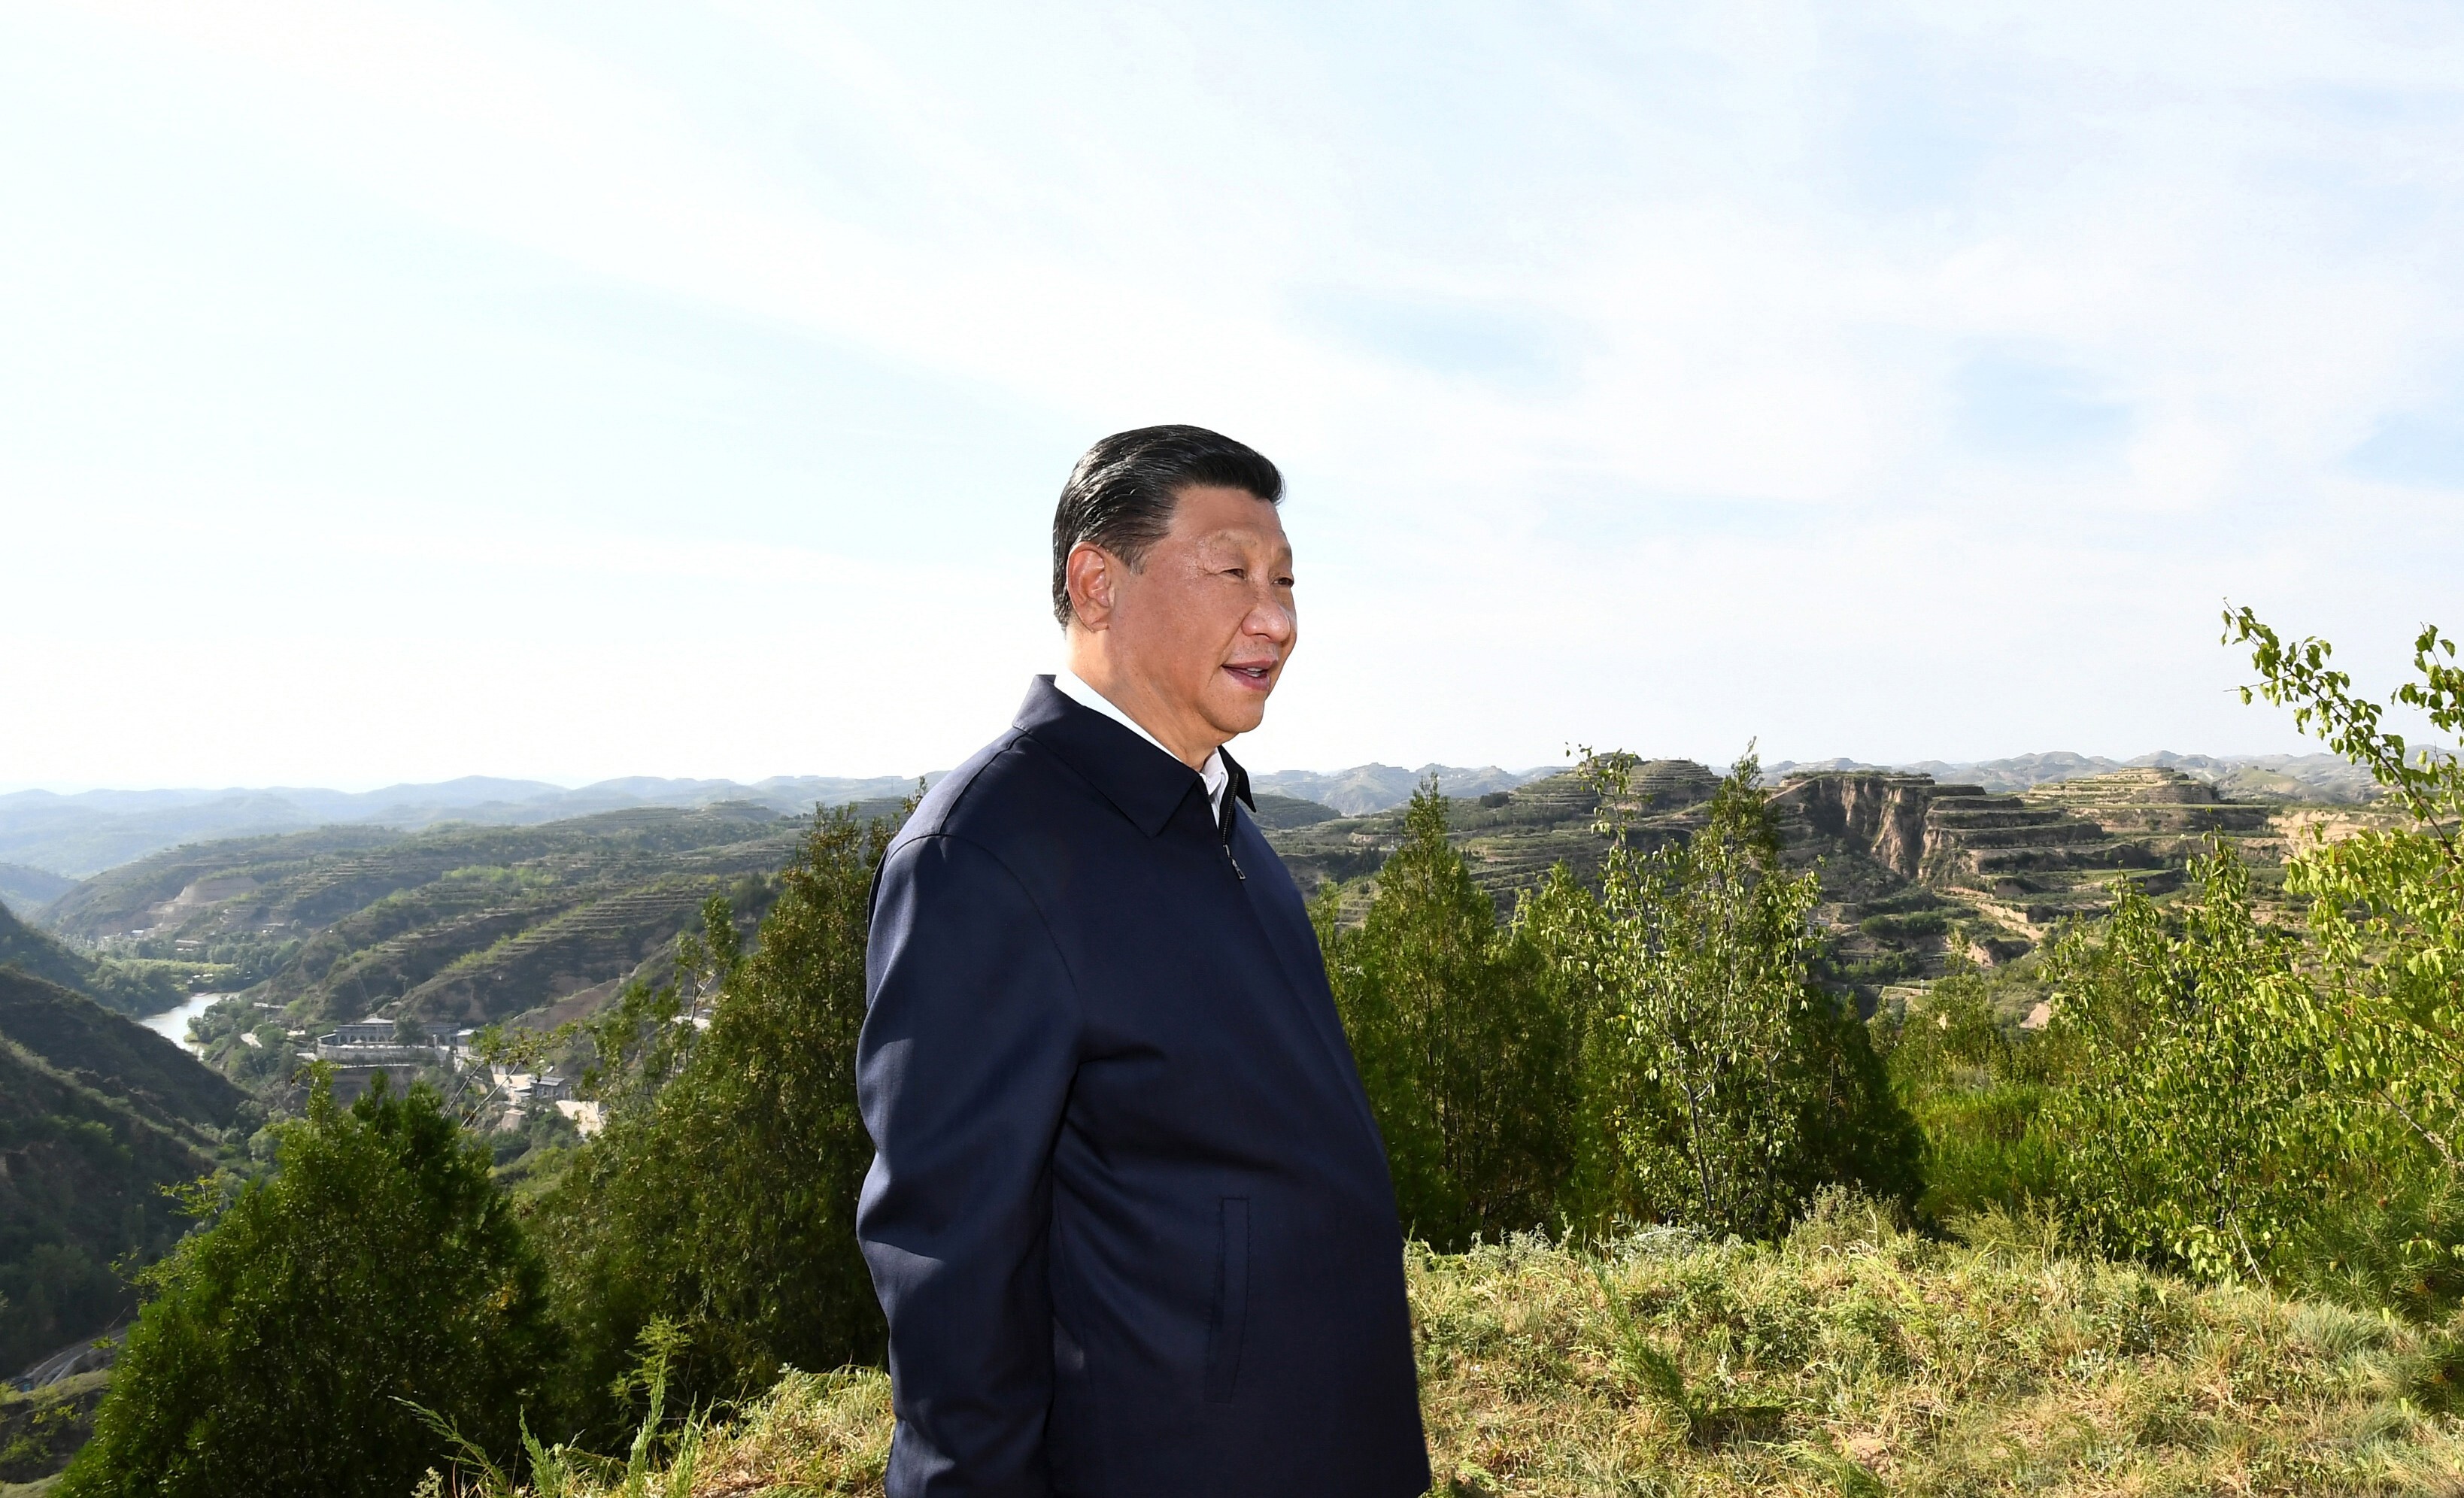 One of the key themes in the articles is Xi Jinping’s longstanding interest in asserting party control over the economy and ideology. Photo: Xinhua